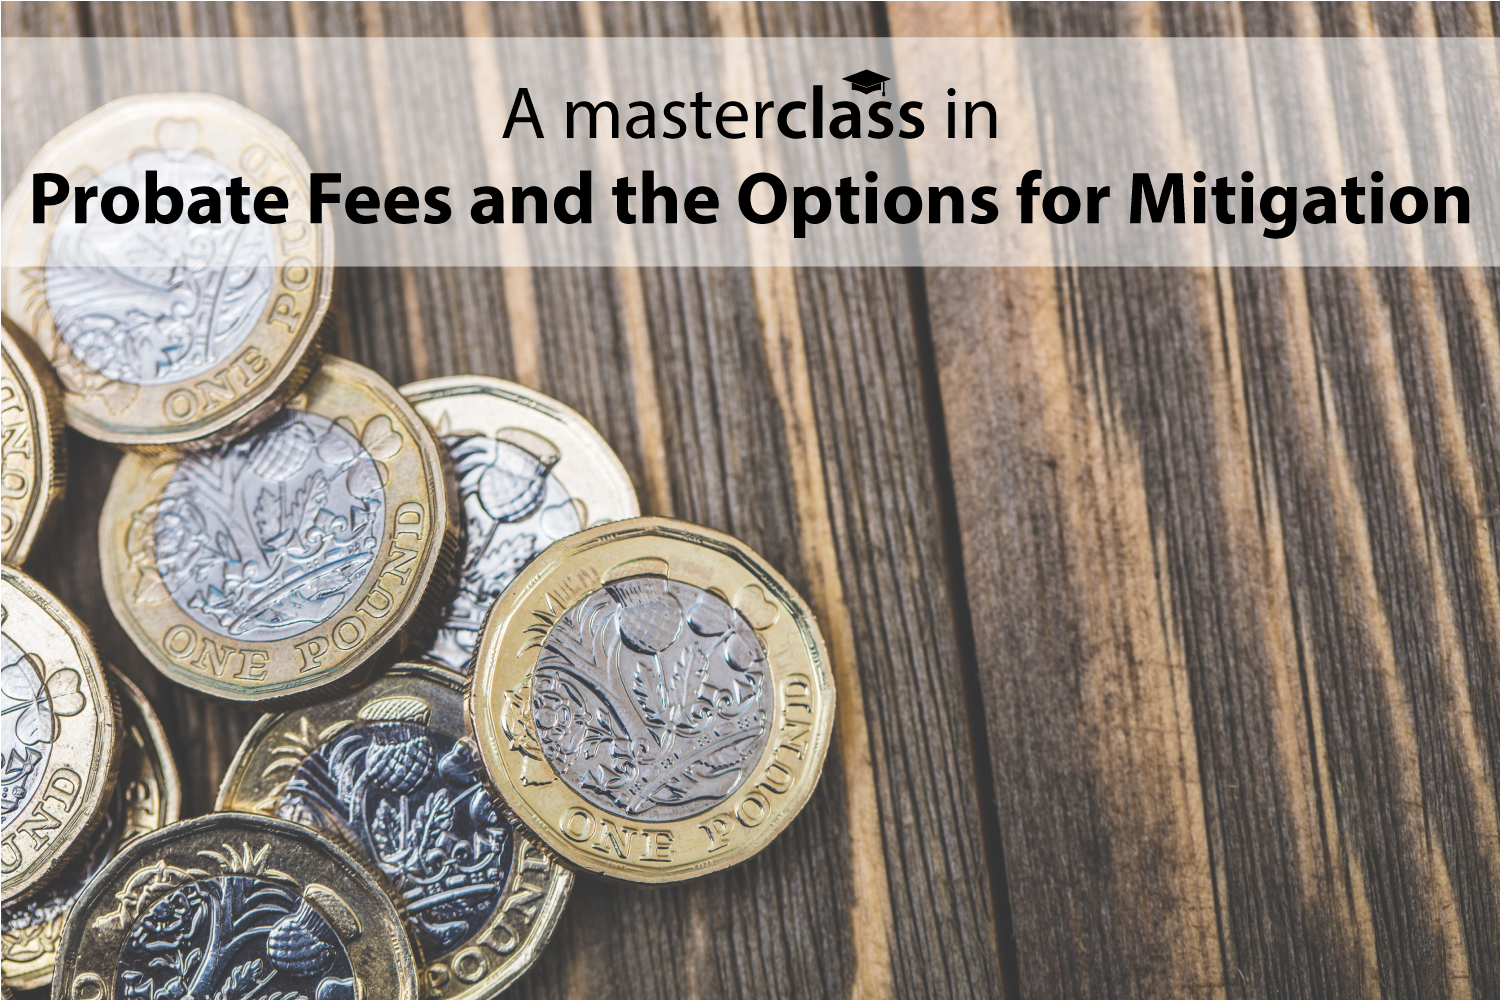 The Government has announced changes to probate fees, effective from April 2019. This means that there will be a huge increase in the fees for most clients.